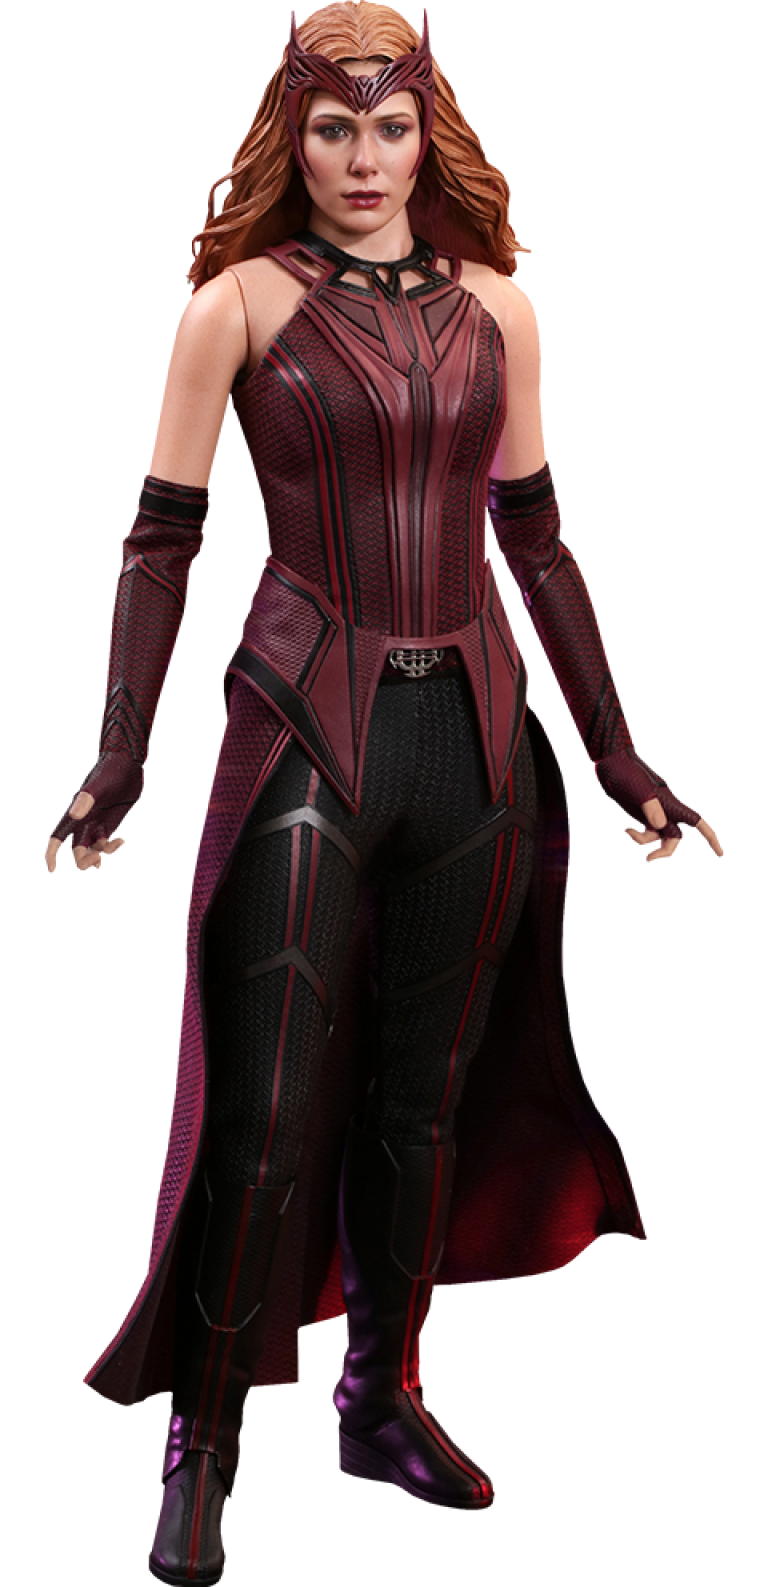 TMS036 WandaVision - The Scarlet Witch - TheHerotoys